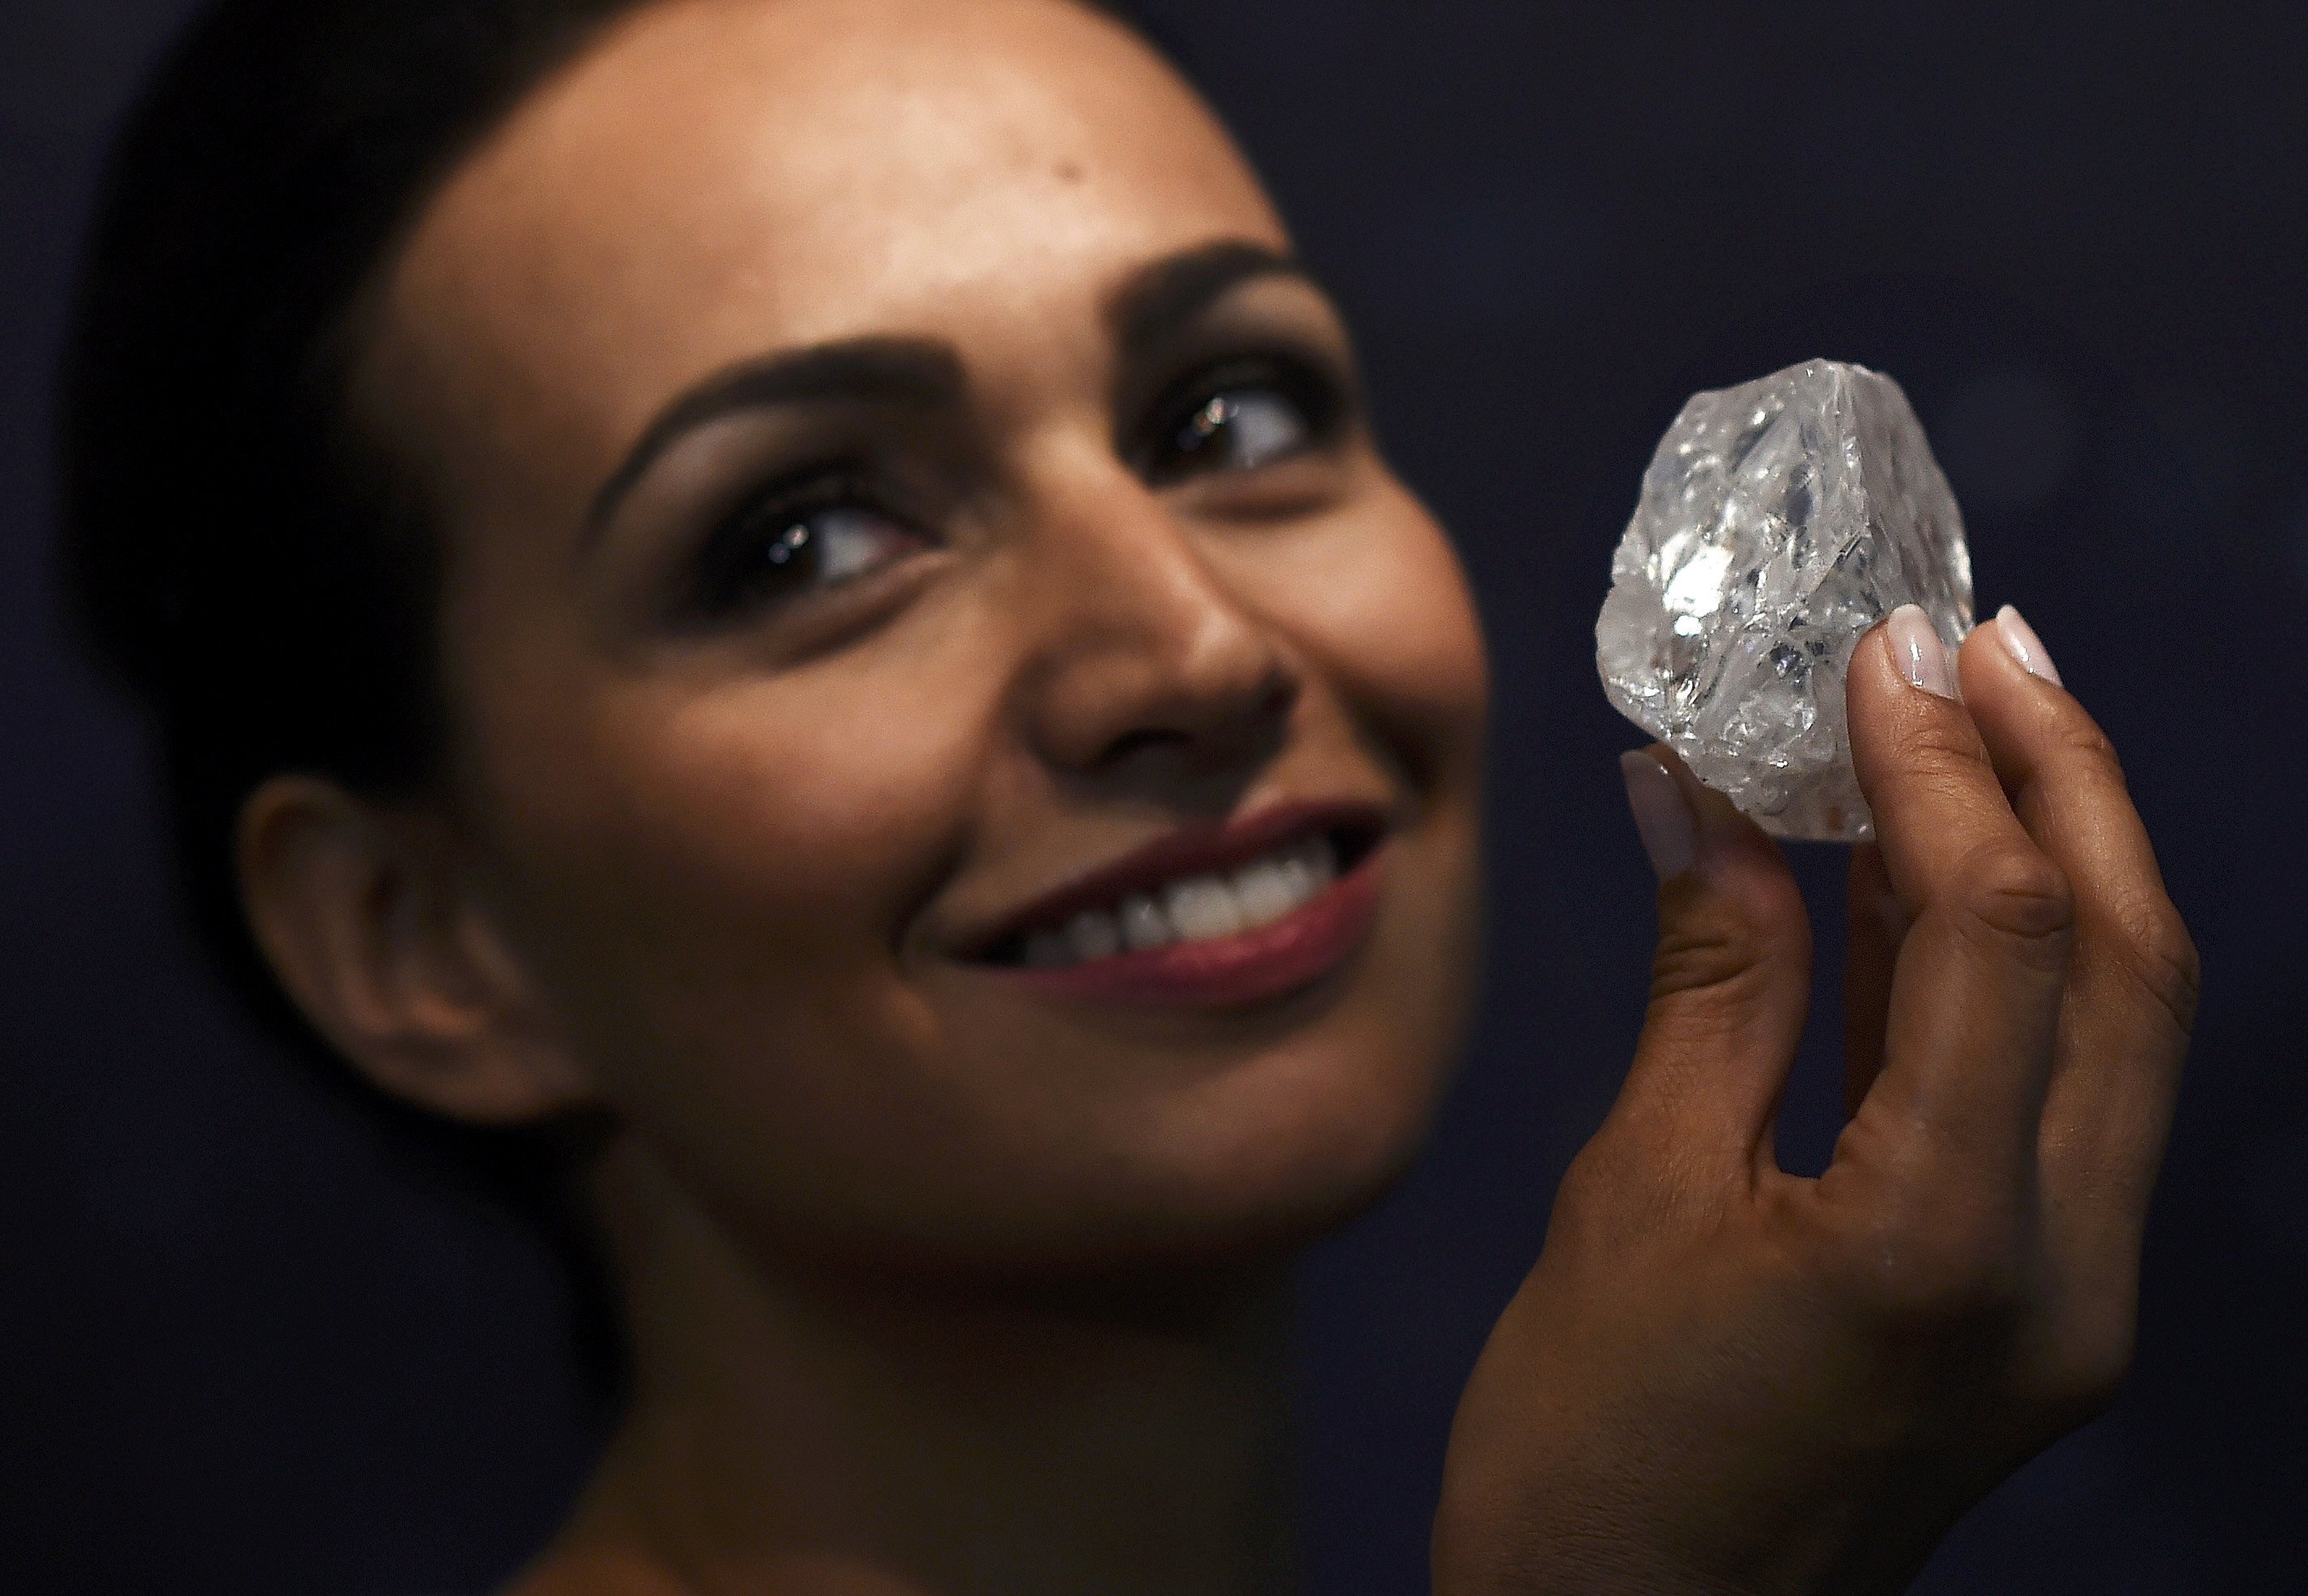 a model shows off the 1109 carat quot lesedi la rona quot the largest gem quality rough diamond discovered in over 100 years during a sale preview at sotheby 039 s auction house in london britain june 14 2016 photo reuters